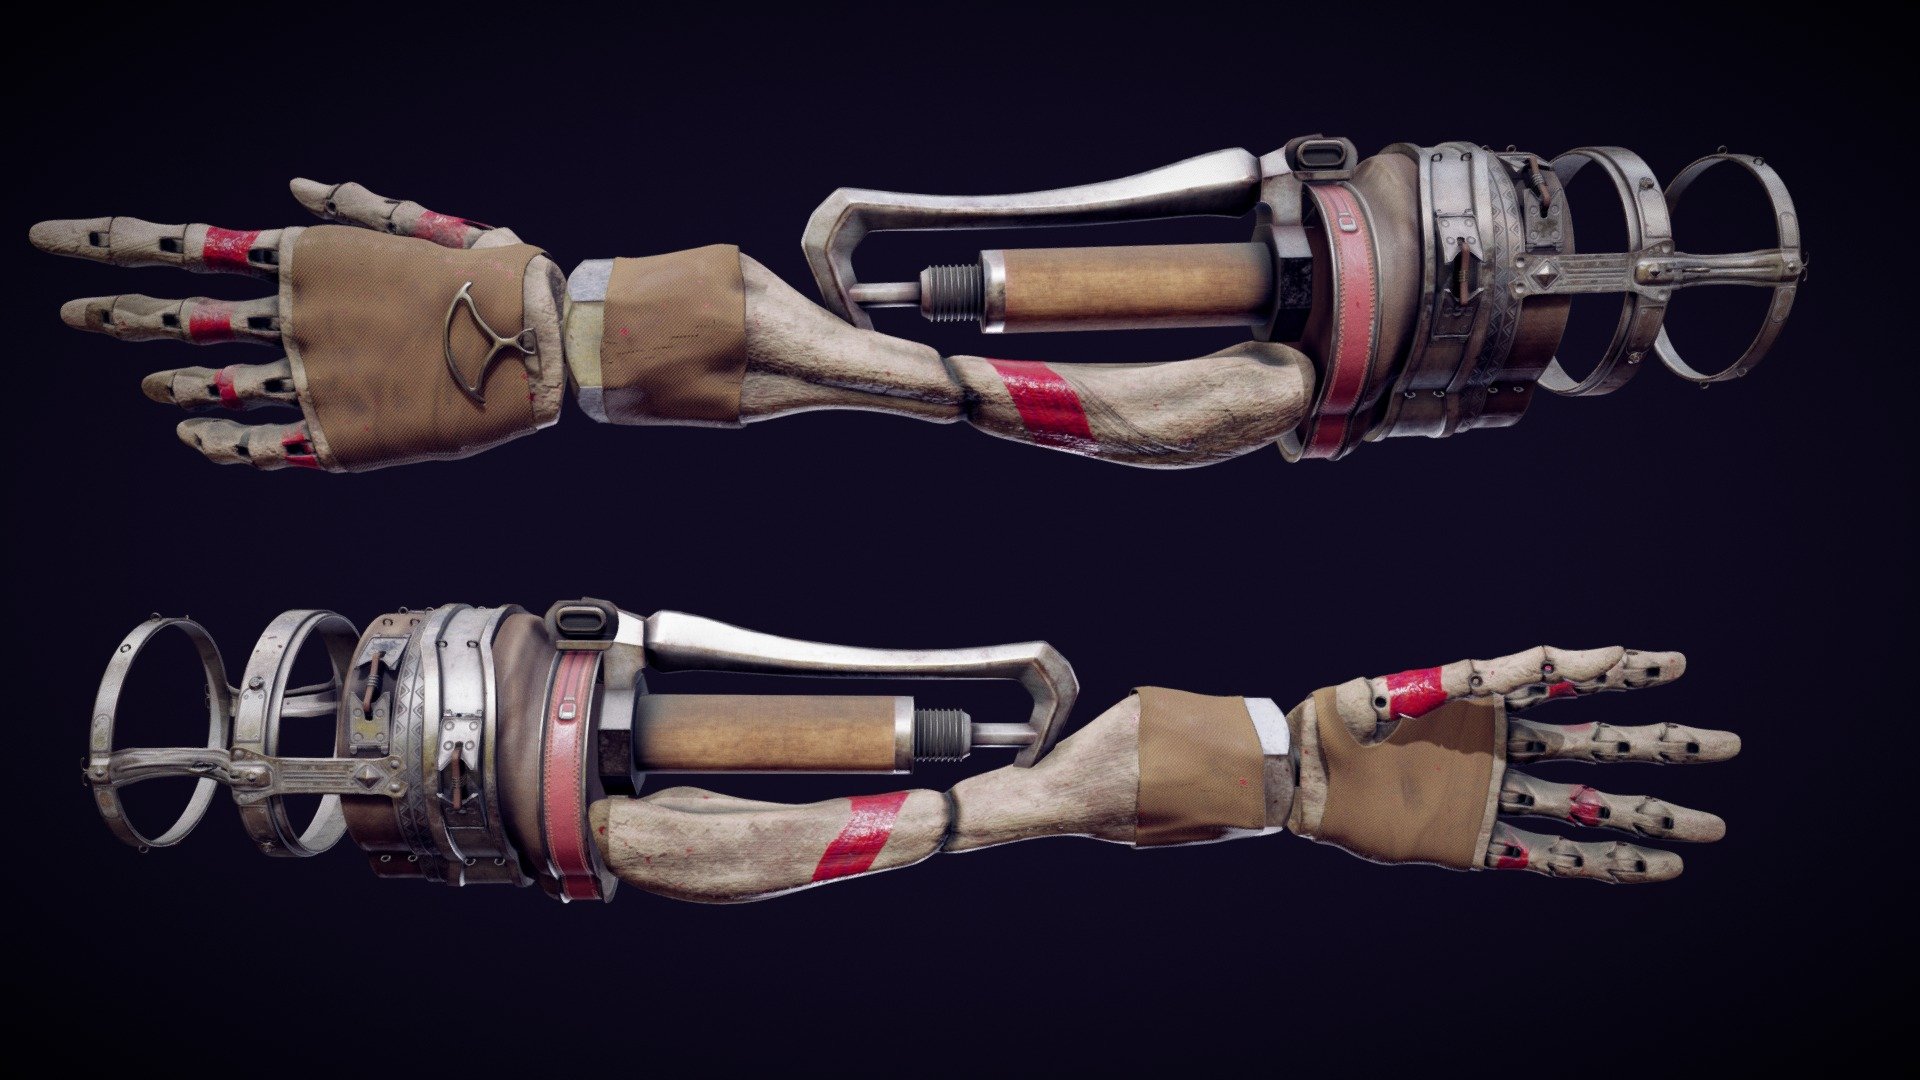 Combat Prosthetic Arm from the game &ldquo;Sekiro: Shadows Die Twice